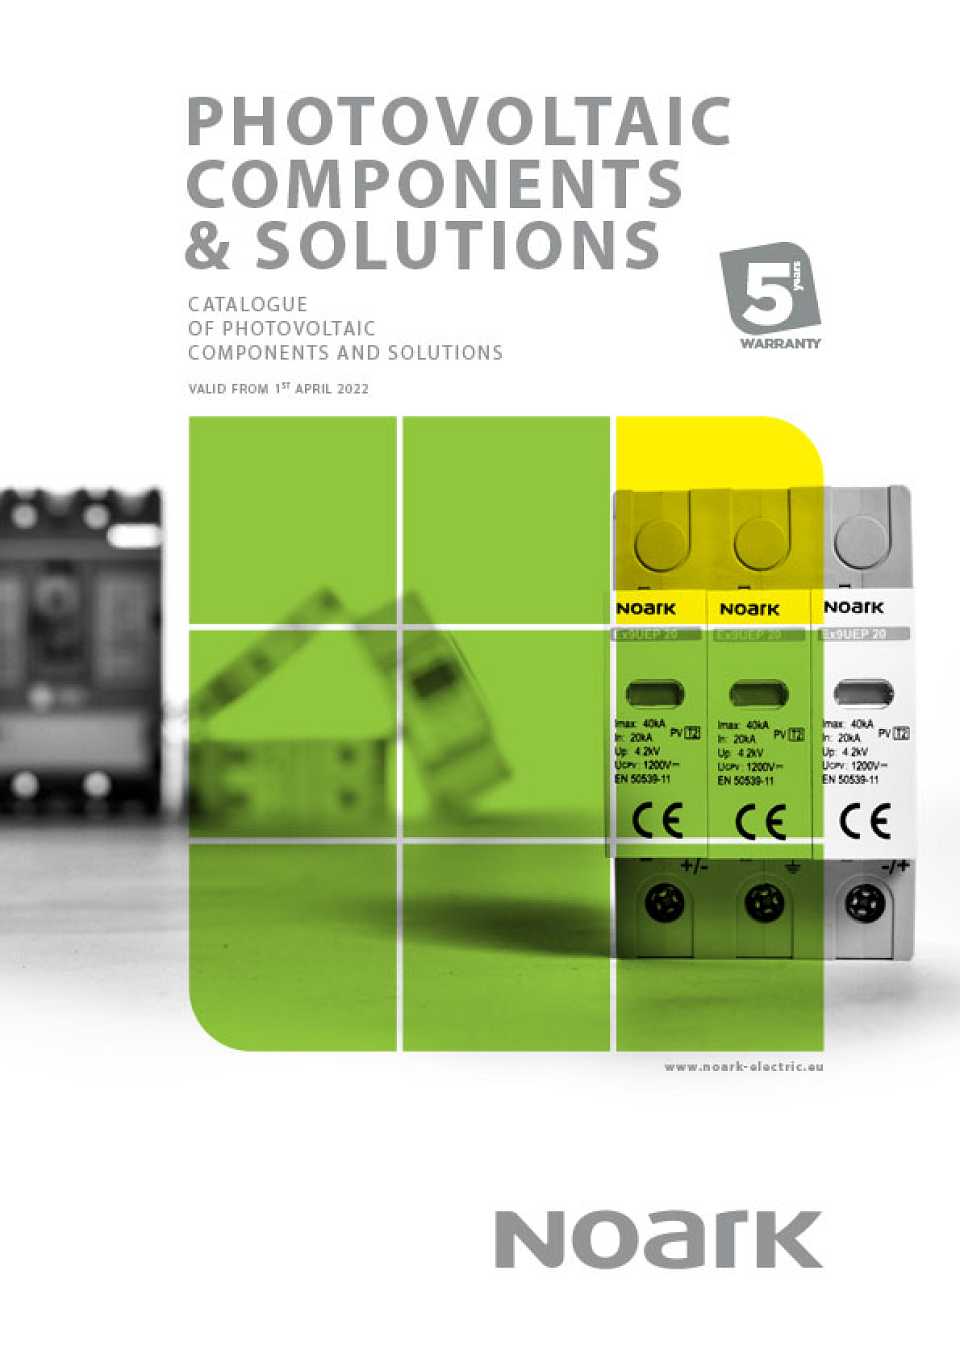 Photovoltaic Components and Solutions Catalogue Cover